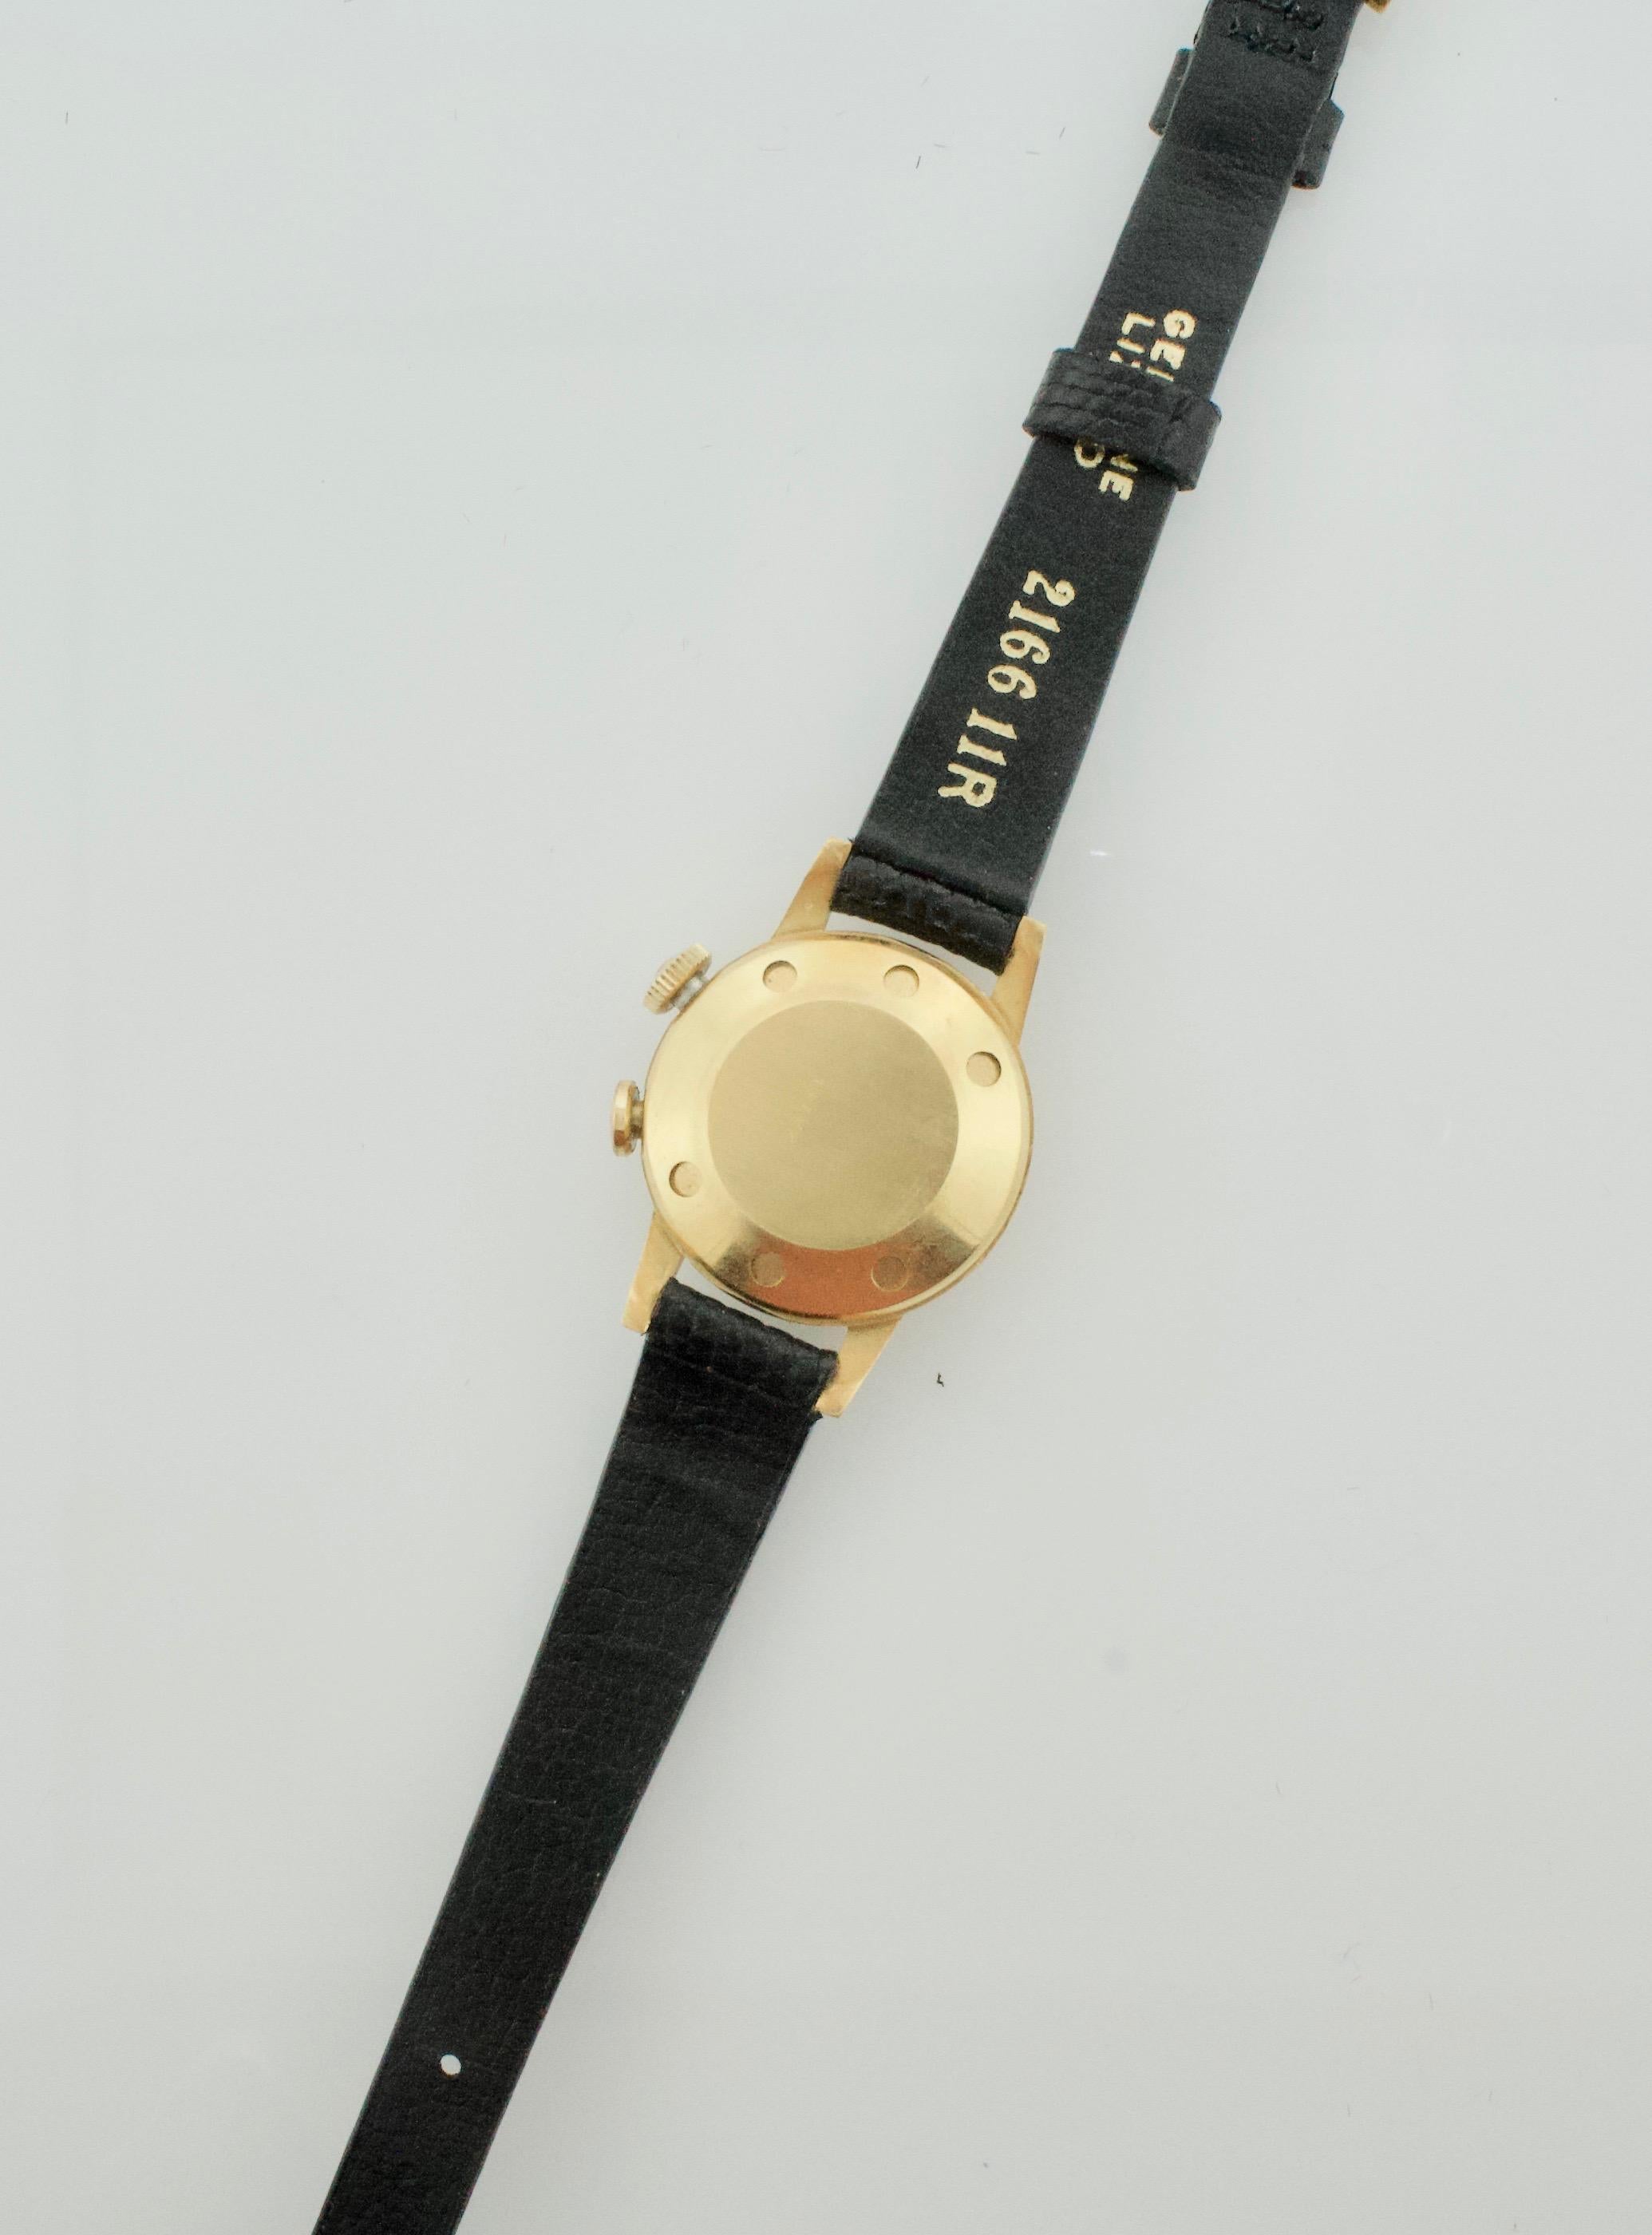 18k Vulcain Alarm Watch Circa 1950's 
From The Inventors of The Alarm Complication for Wristwatches.  While Your Friends and Enemies Wake to an Annoying Bleep or Bloop You Wake to the 